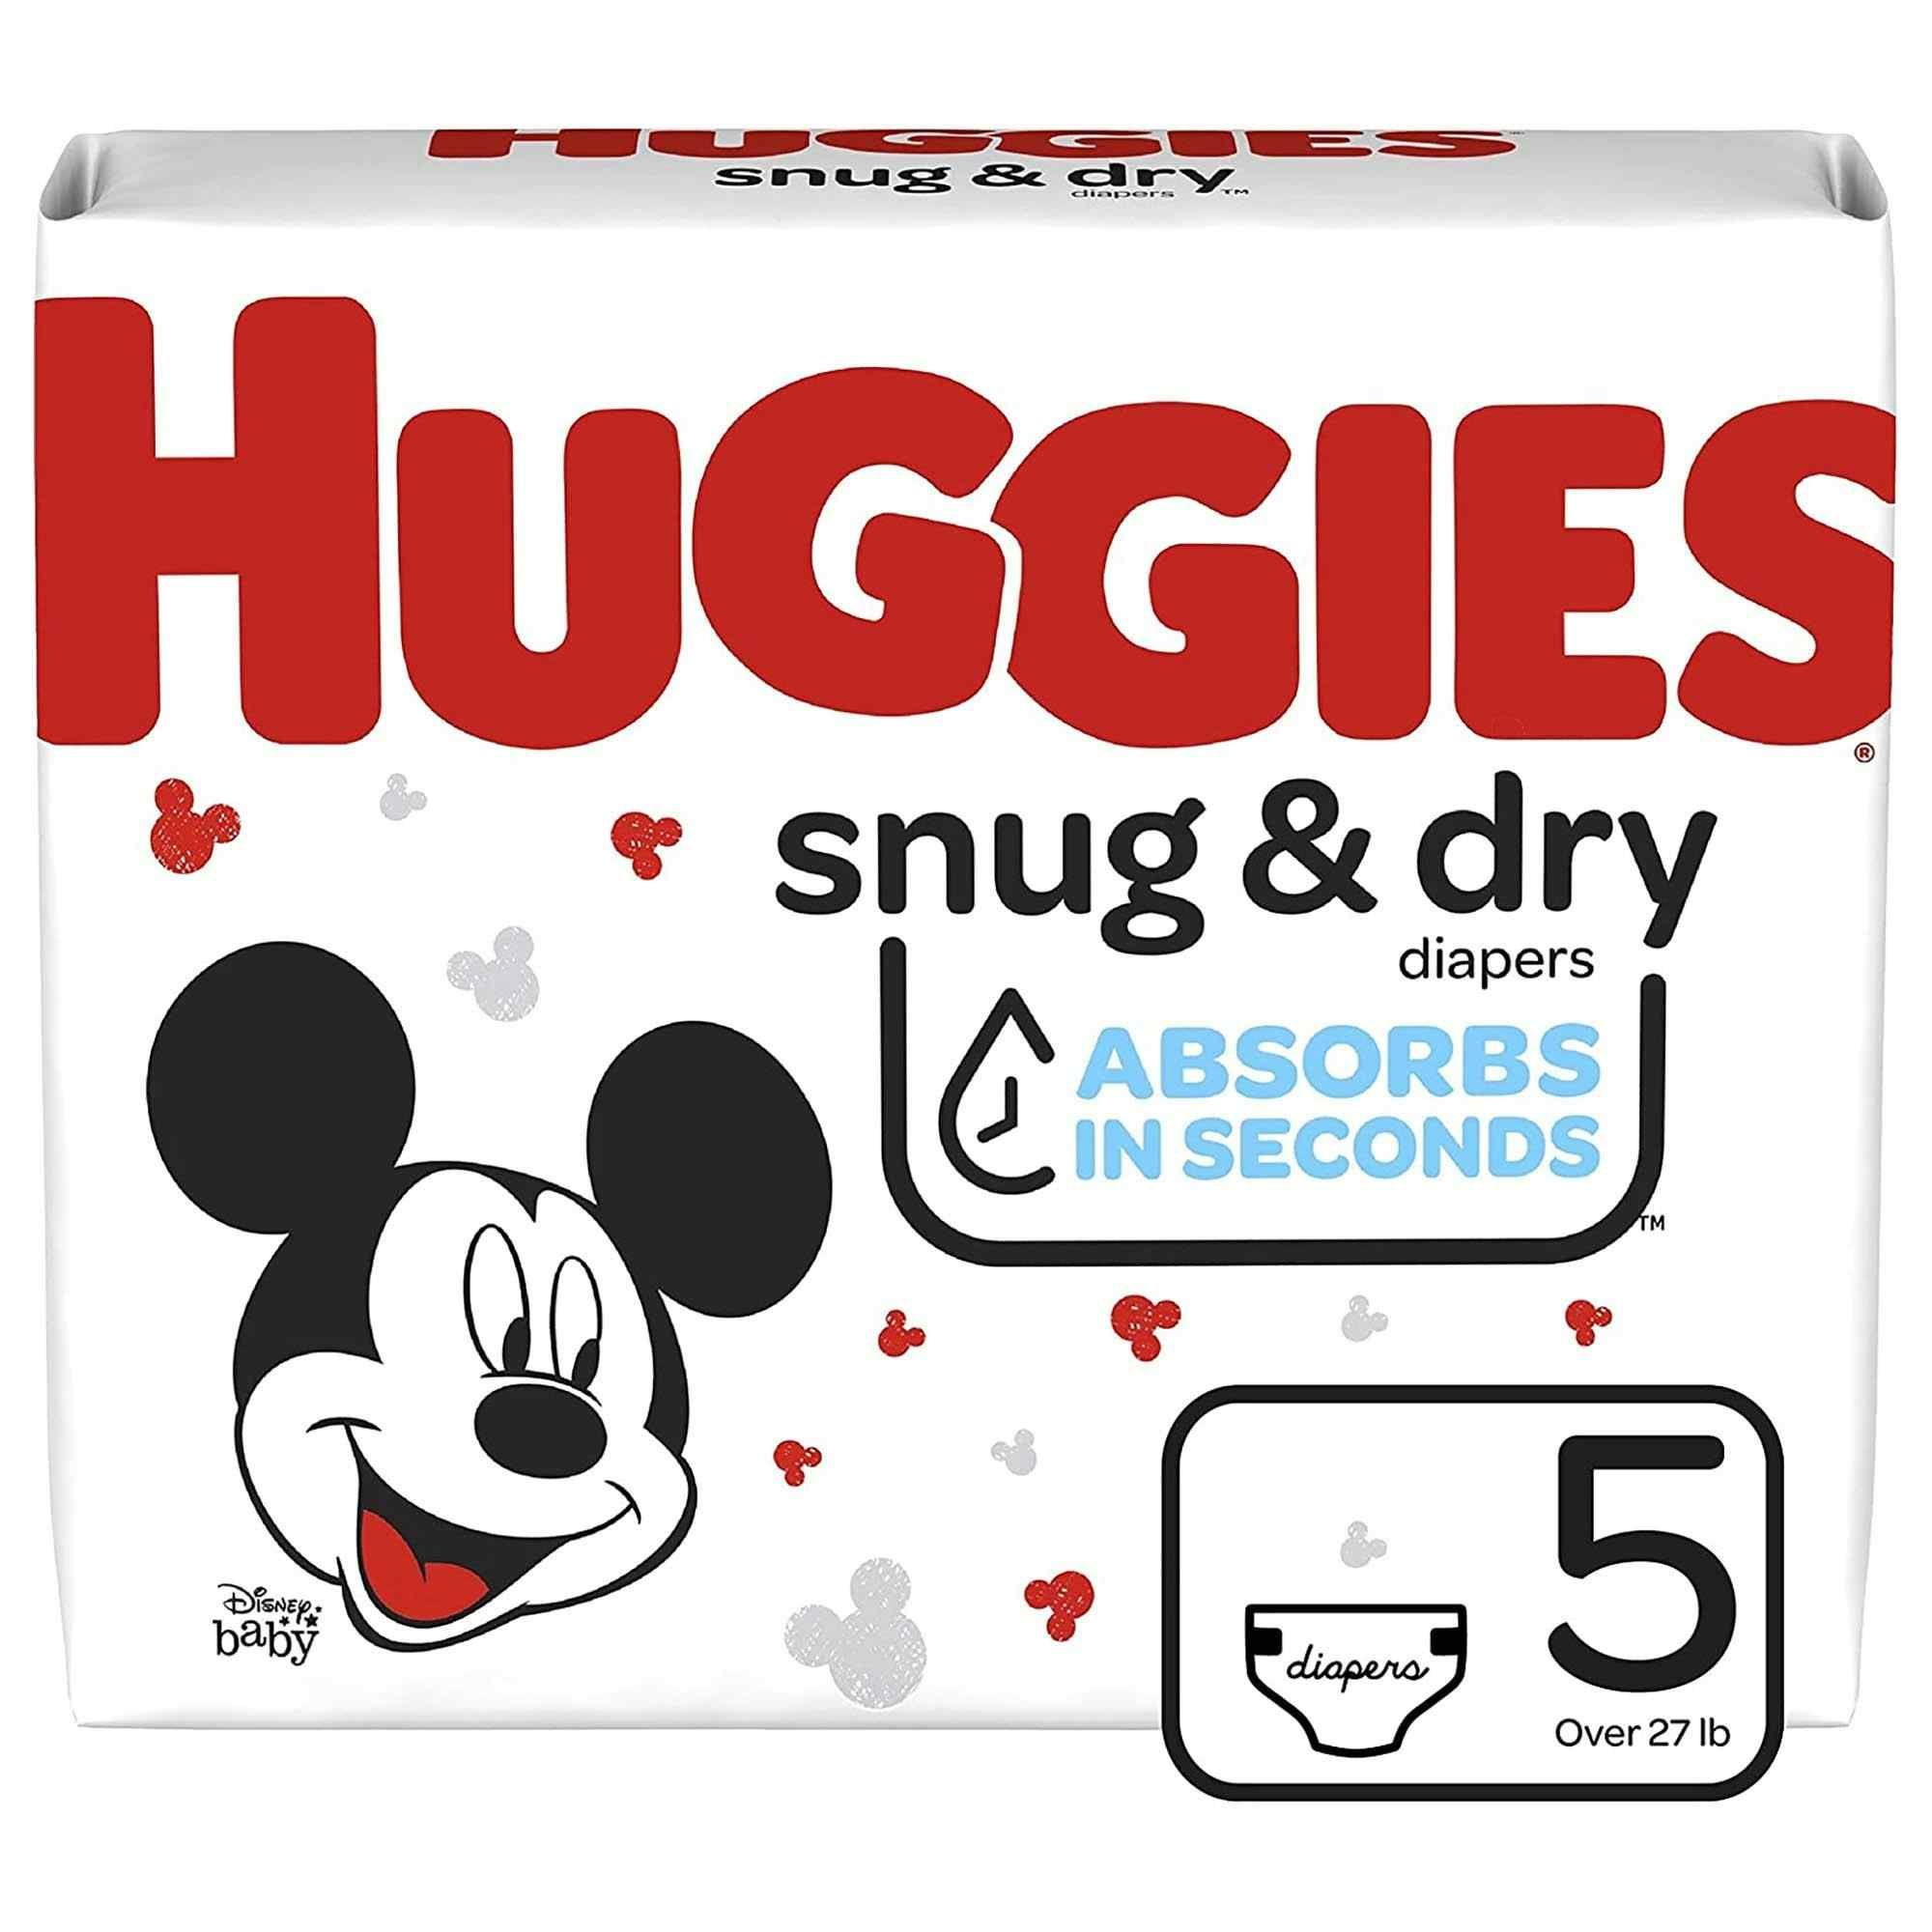 Huggies Snug & Dry Baby Diapers with Tabs, Heavy Absorbency, 51473, Size 5 (Over 27 lbs.) - Case of 188